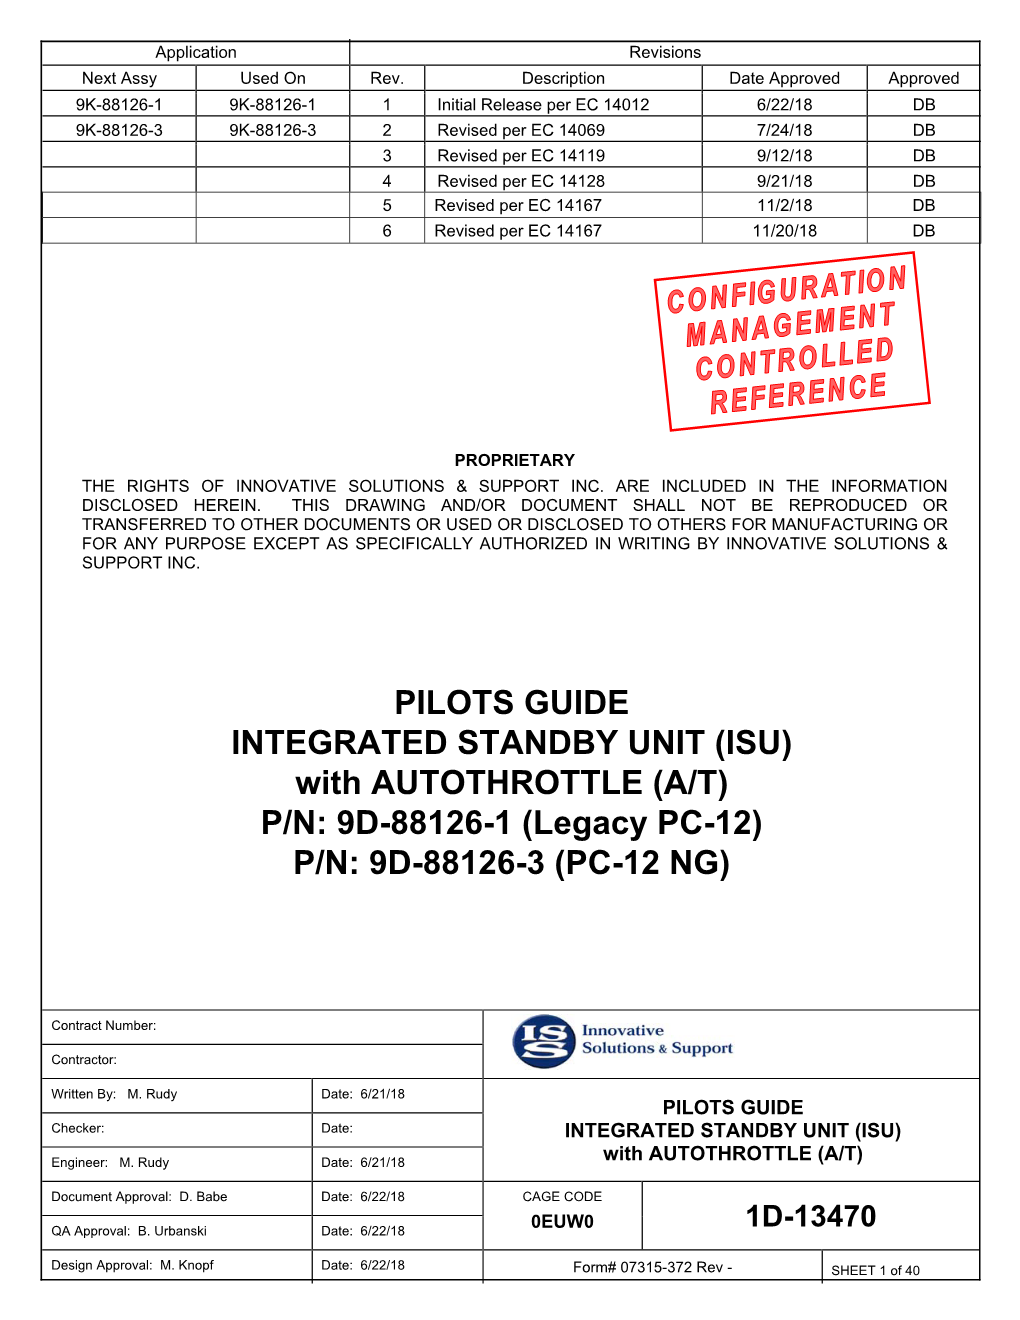 PILOTS GUIDE INTEGRATED STANDBY UNIT (ISU) with AUTOTHROTTLE (A/T) P/N: 9D-88126-1 (Legacy PC-12) P/N: 9D-88126-3 (PC-12 NG)